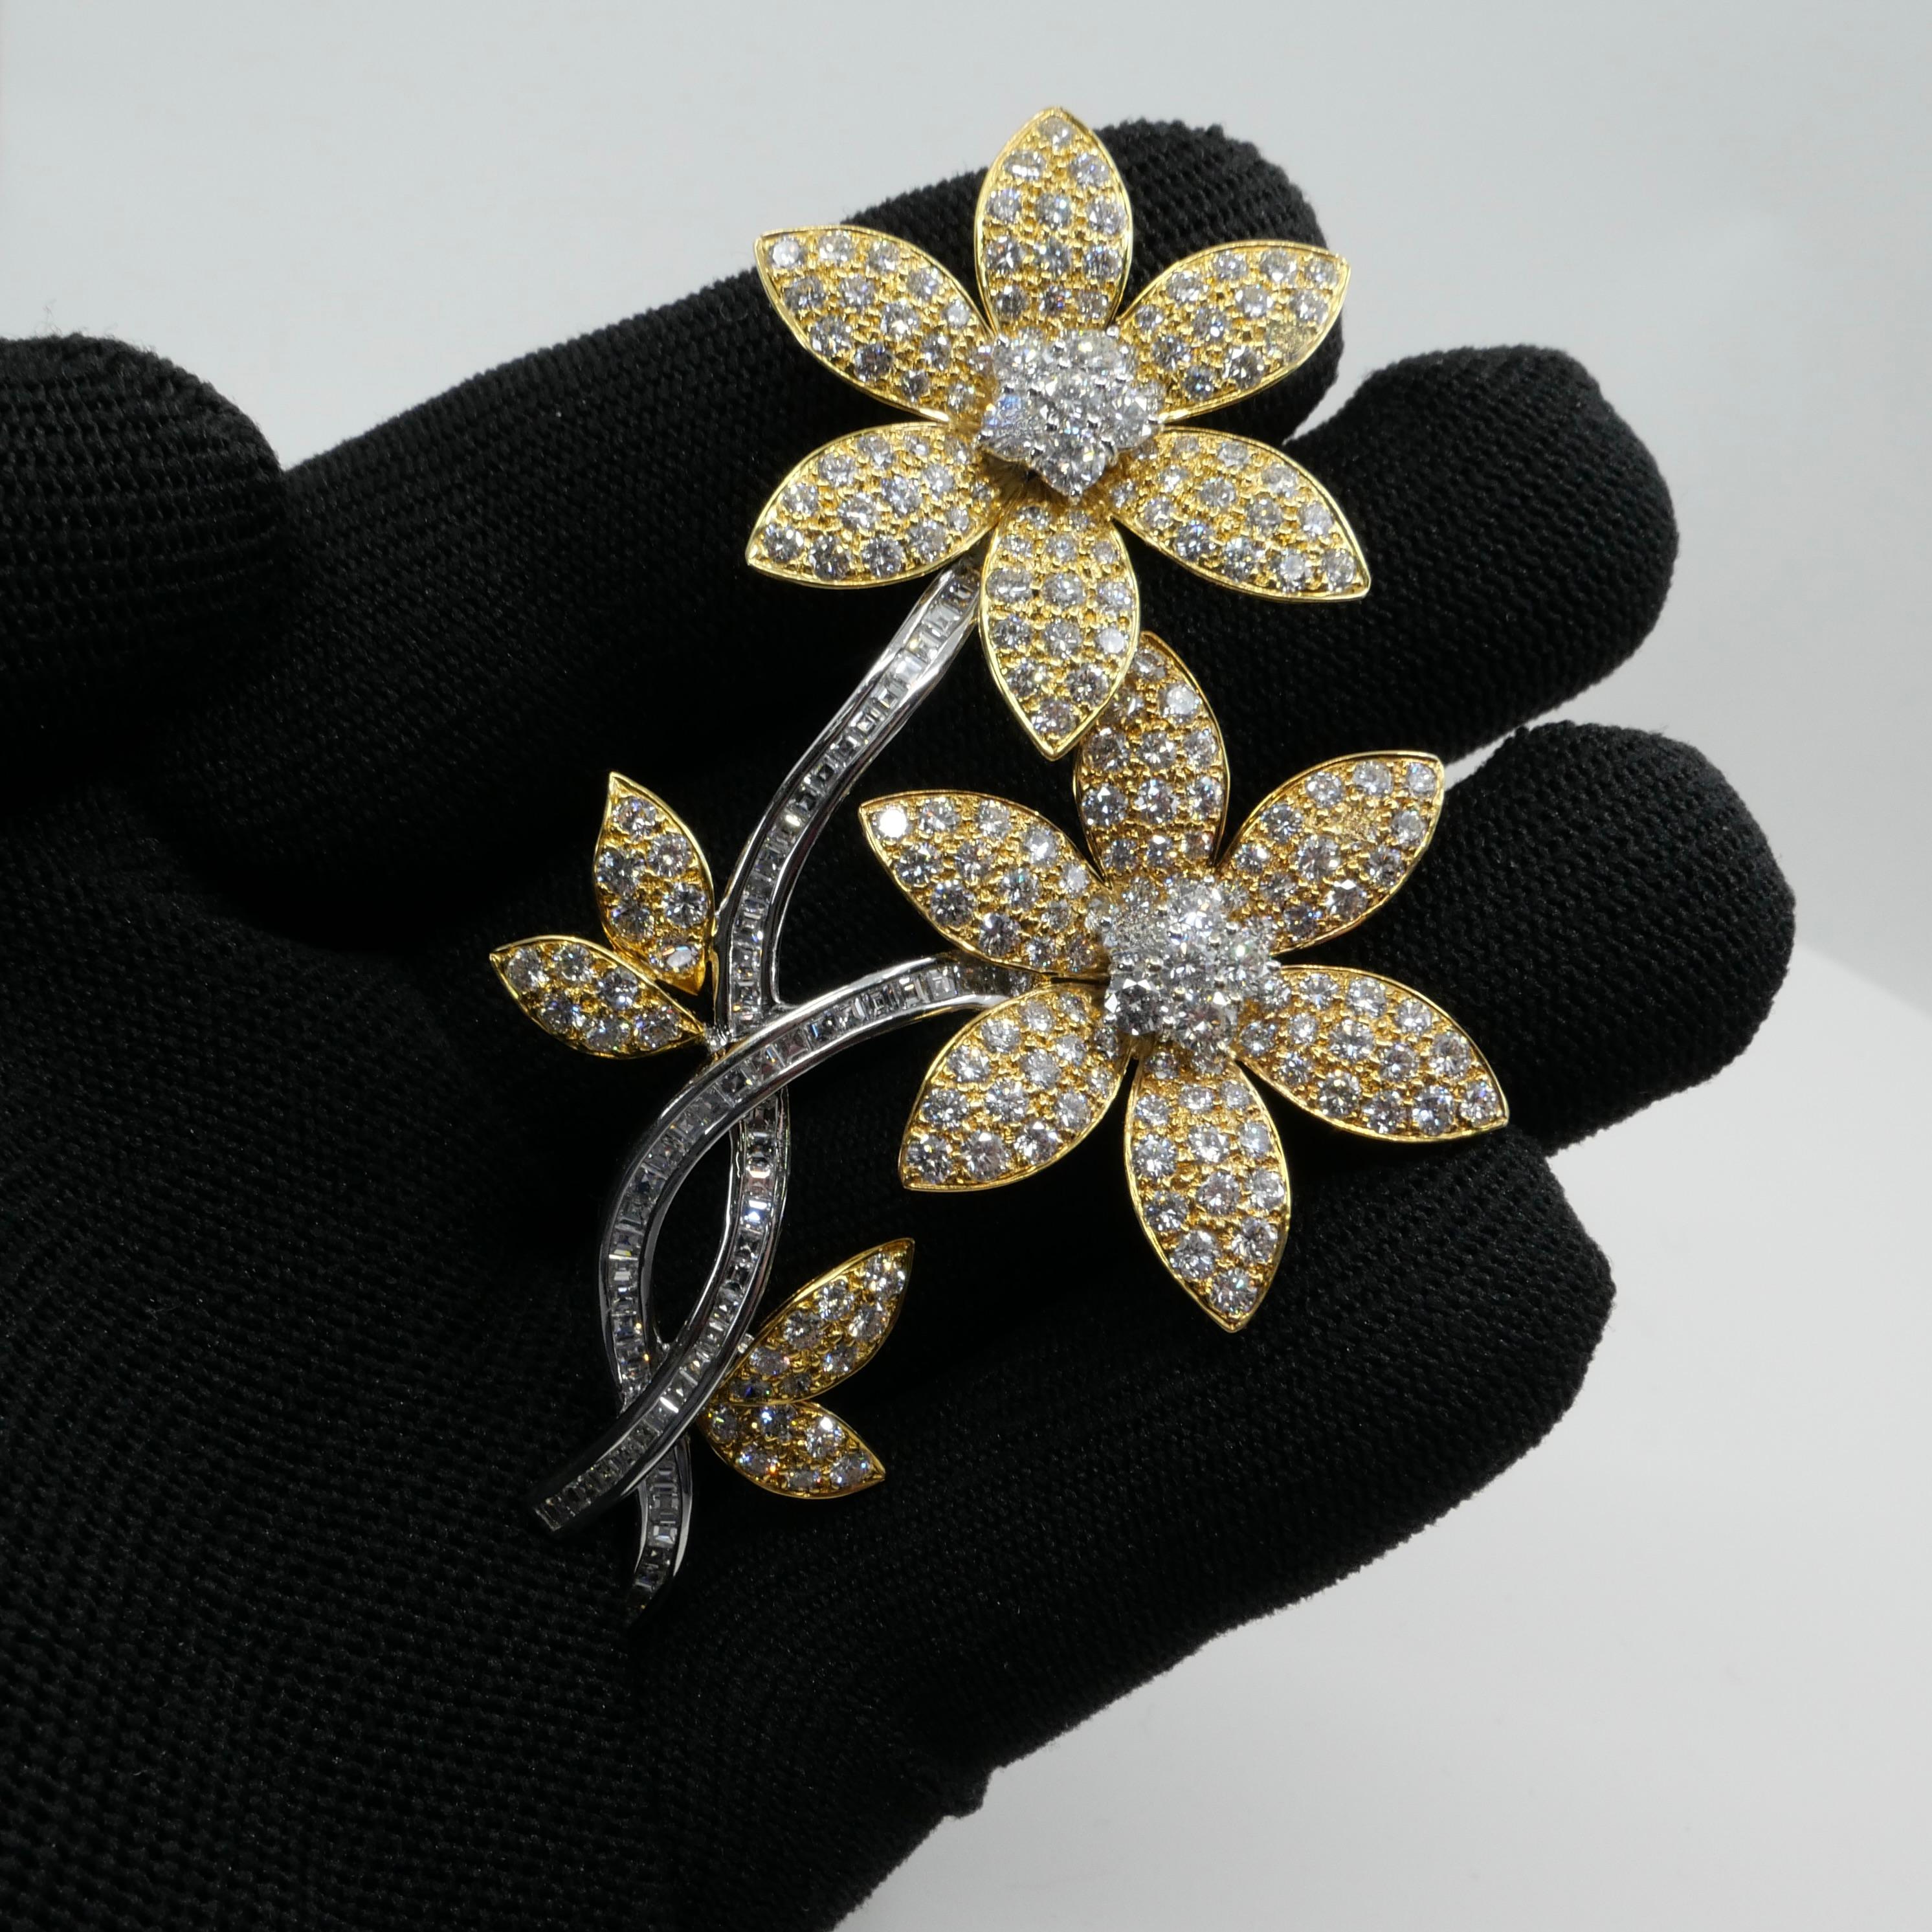 what is a brooch used for